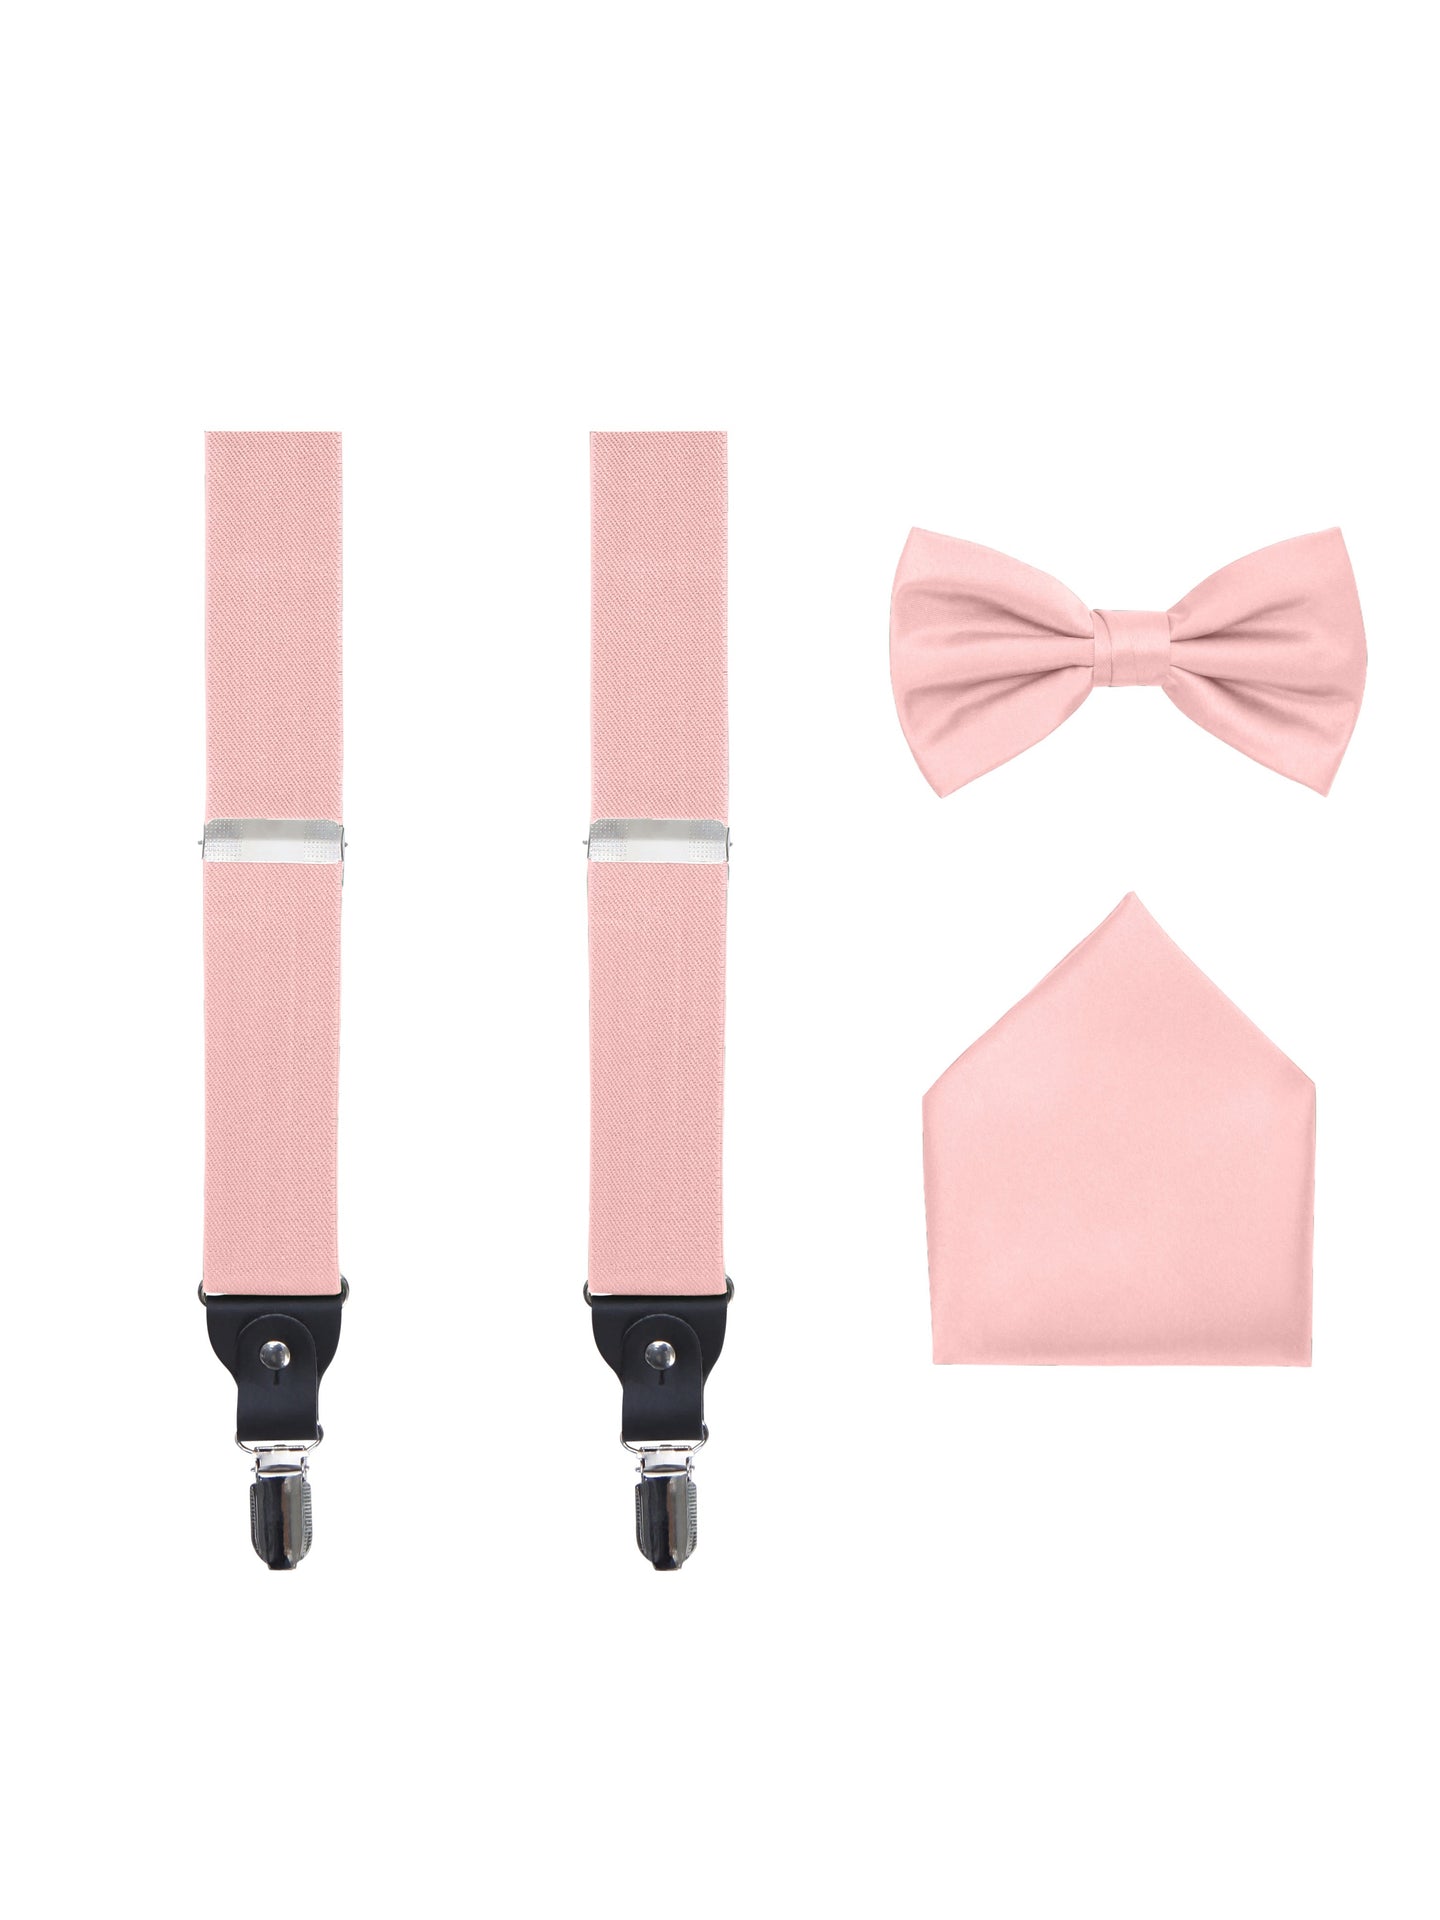 S.H. Churchill & Co. Men's 3 Piece Peach Suspender Set - Includes Suspenders, Matching Bow Tie, Pocket Hanky and Gift Box